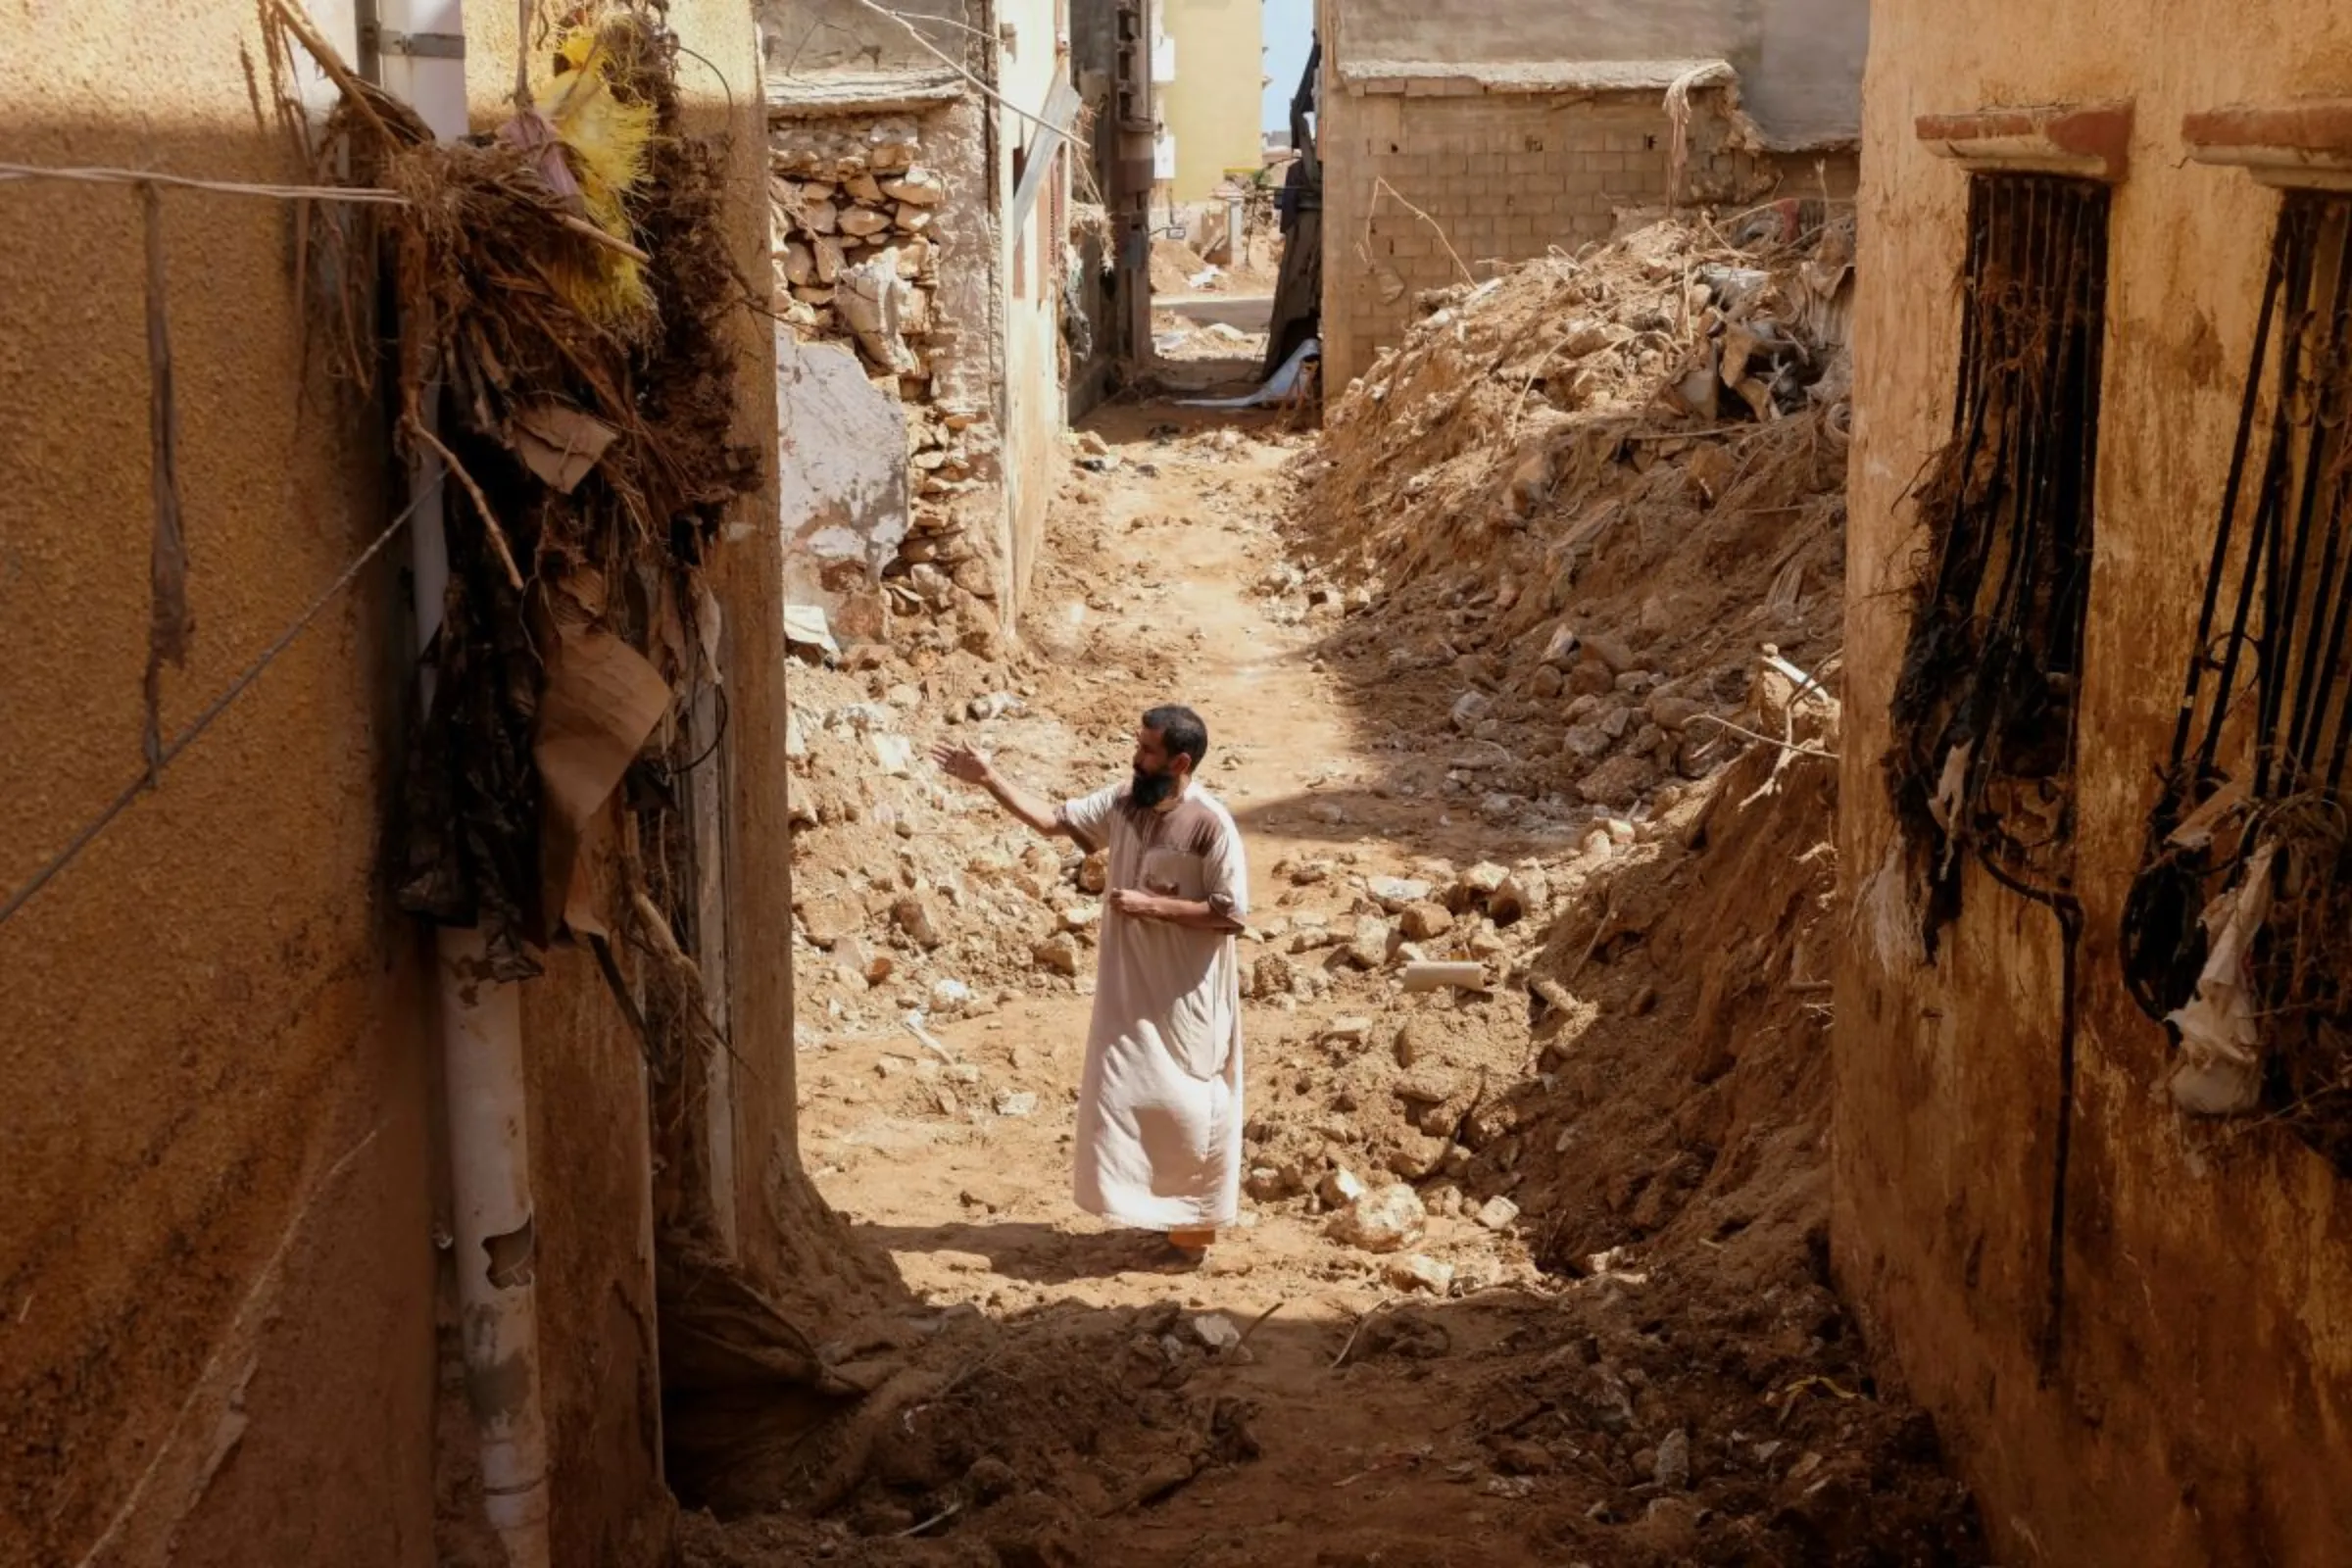 A man inspects damaged buildings, in the aftermath of a deadly storm and flooding that hit Libya, in Derna, Libya September 20, 2023